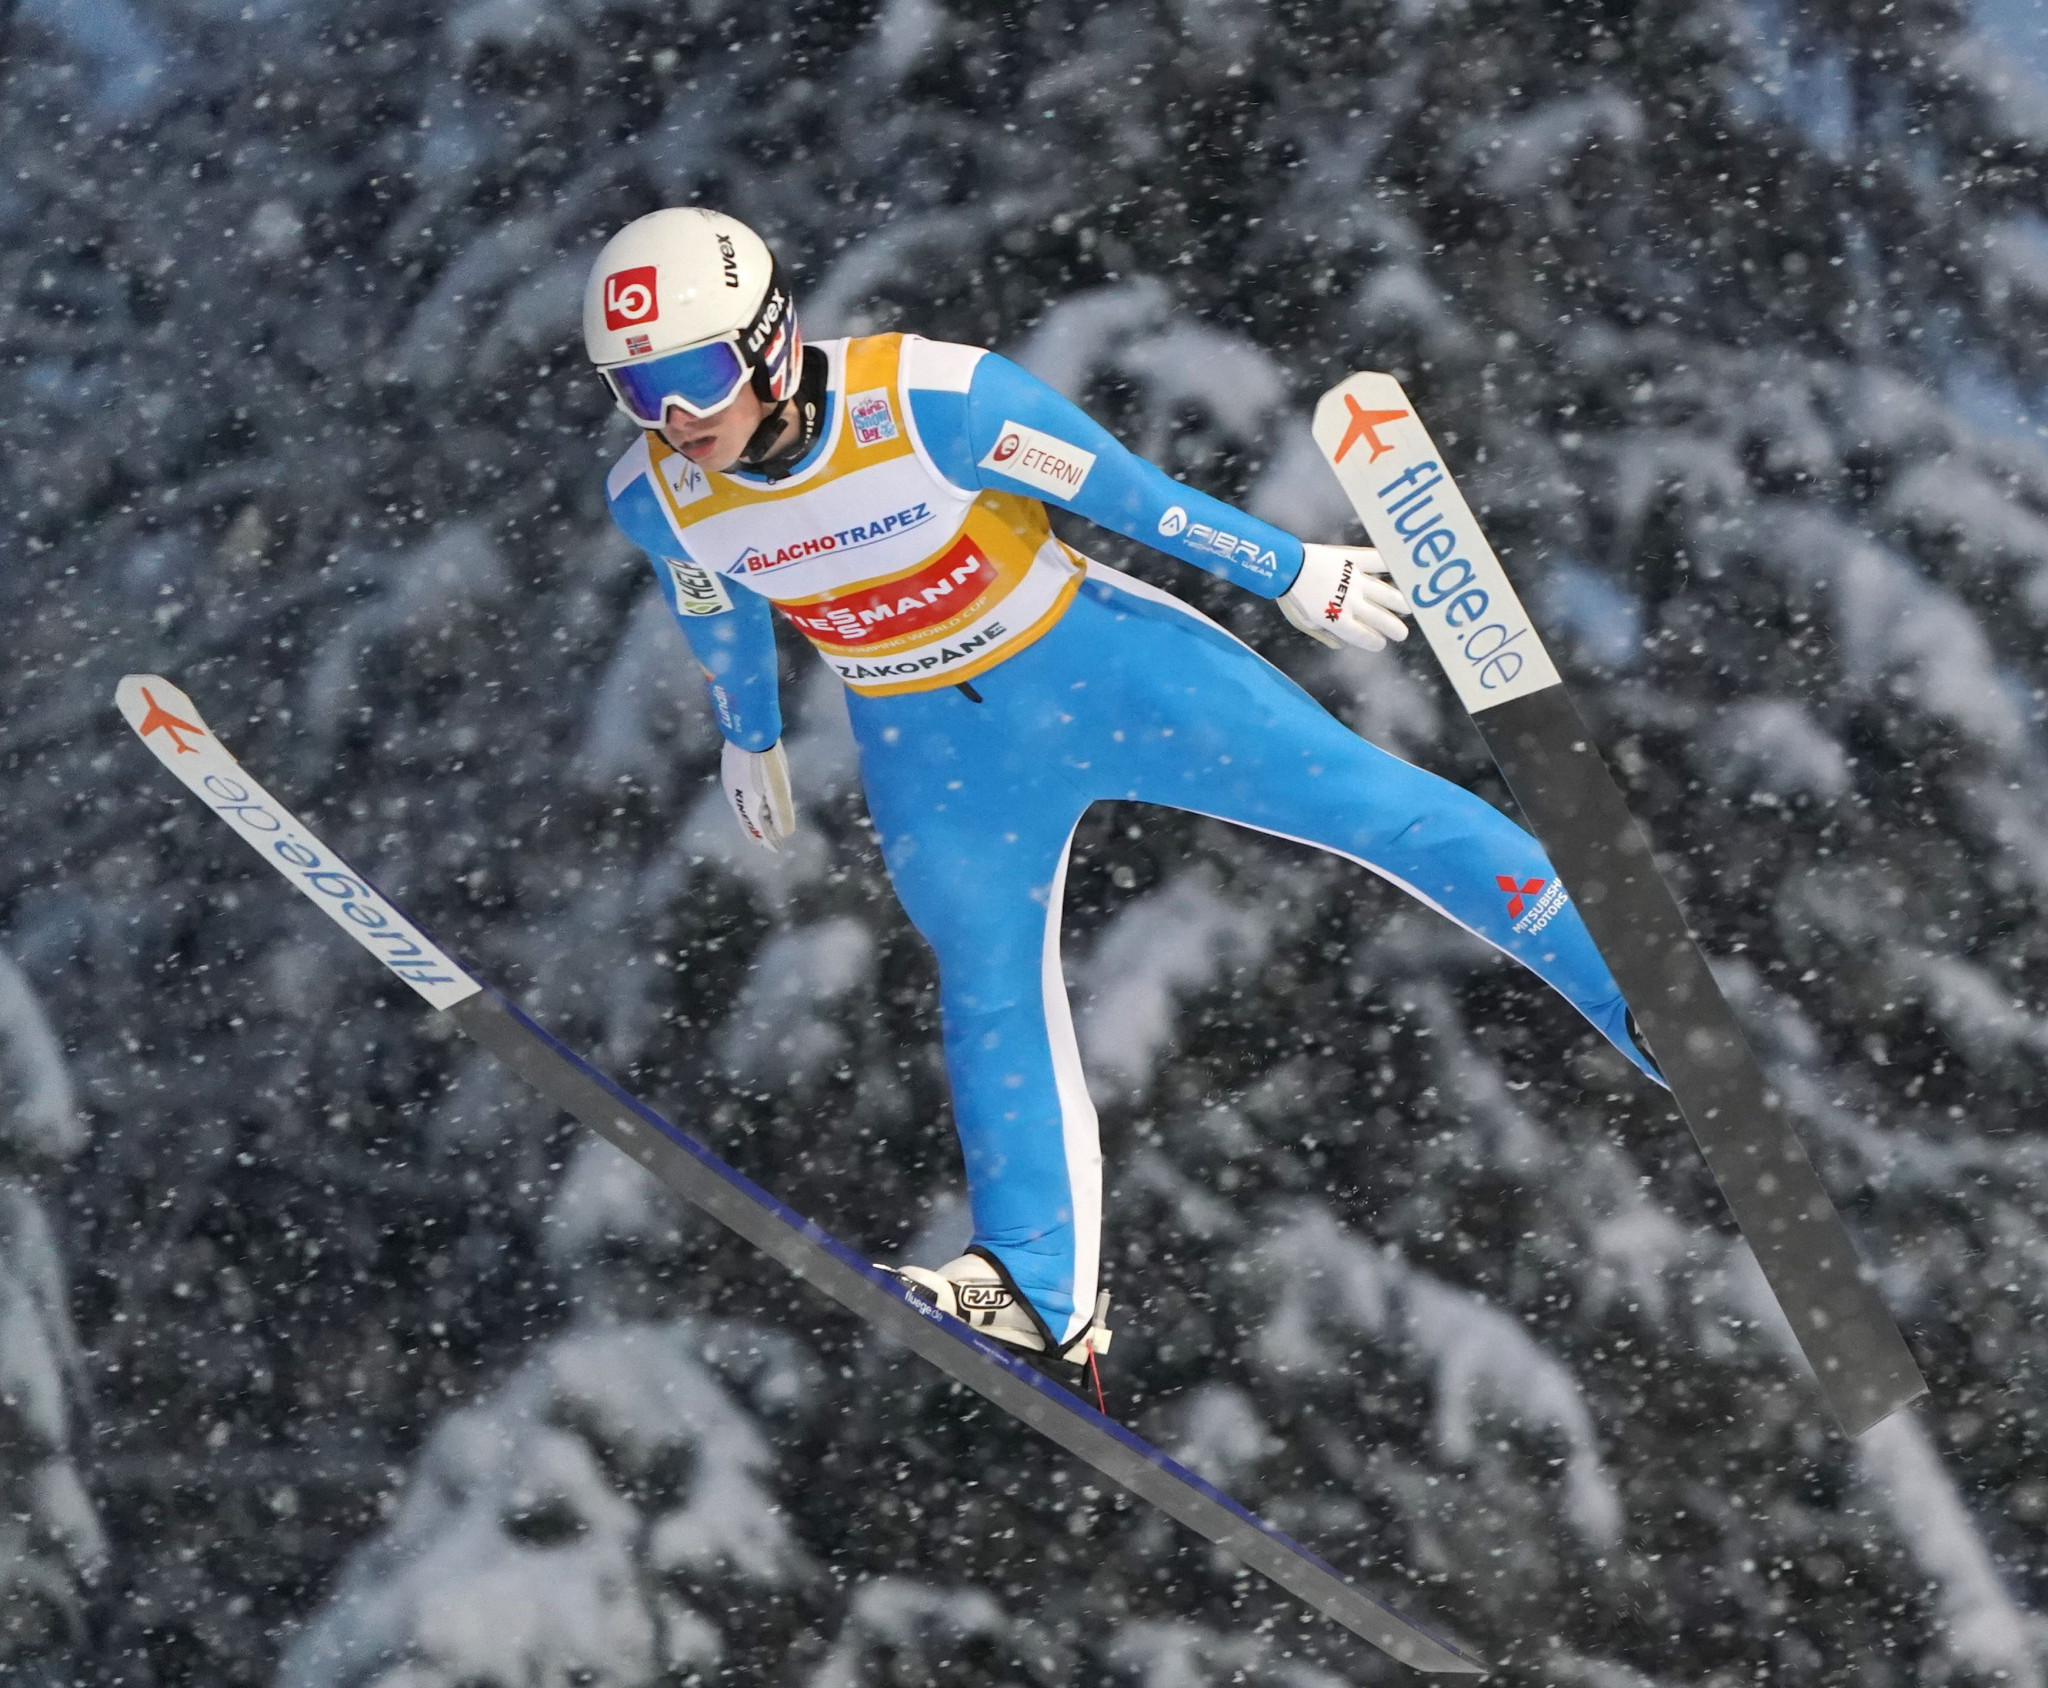 Granerud step closer to overall Ski Jumping World Cup title with Zakopane win